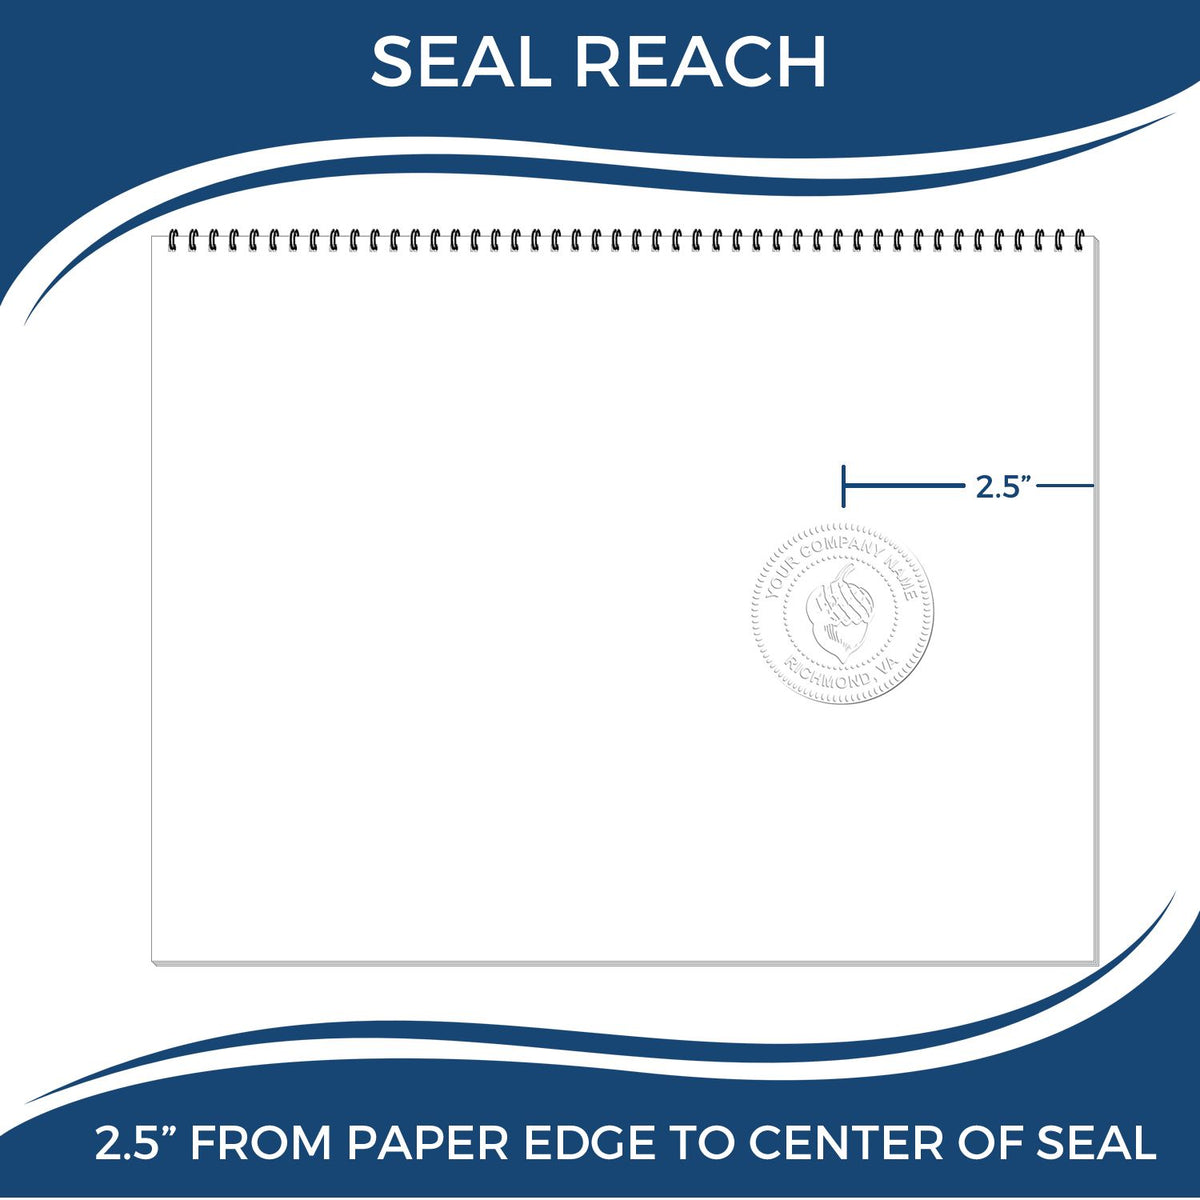 An infographic showing the seal reach which is represented by a ruler and a miniature seal image of the Long Reach Delaware Land Surveyor Seal